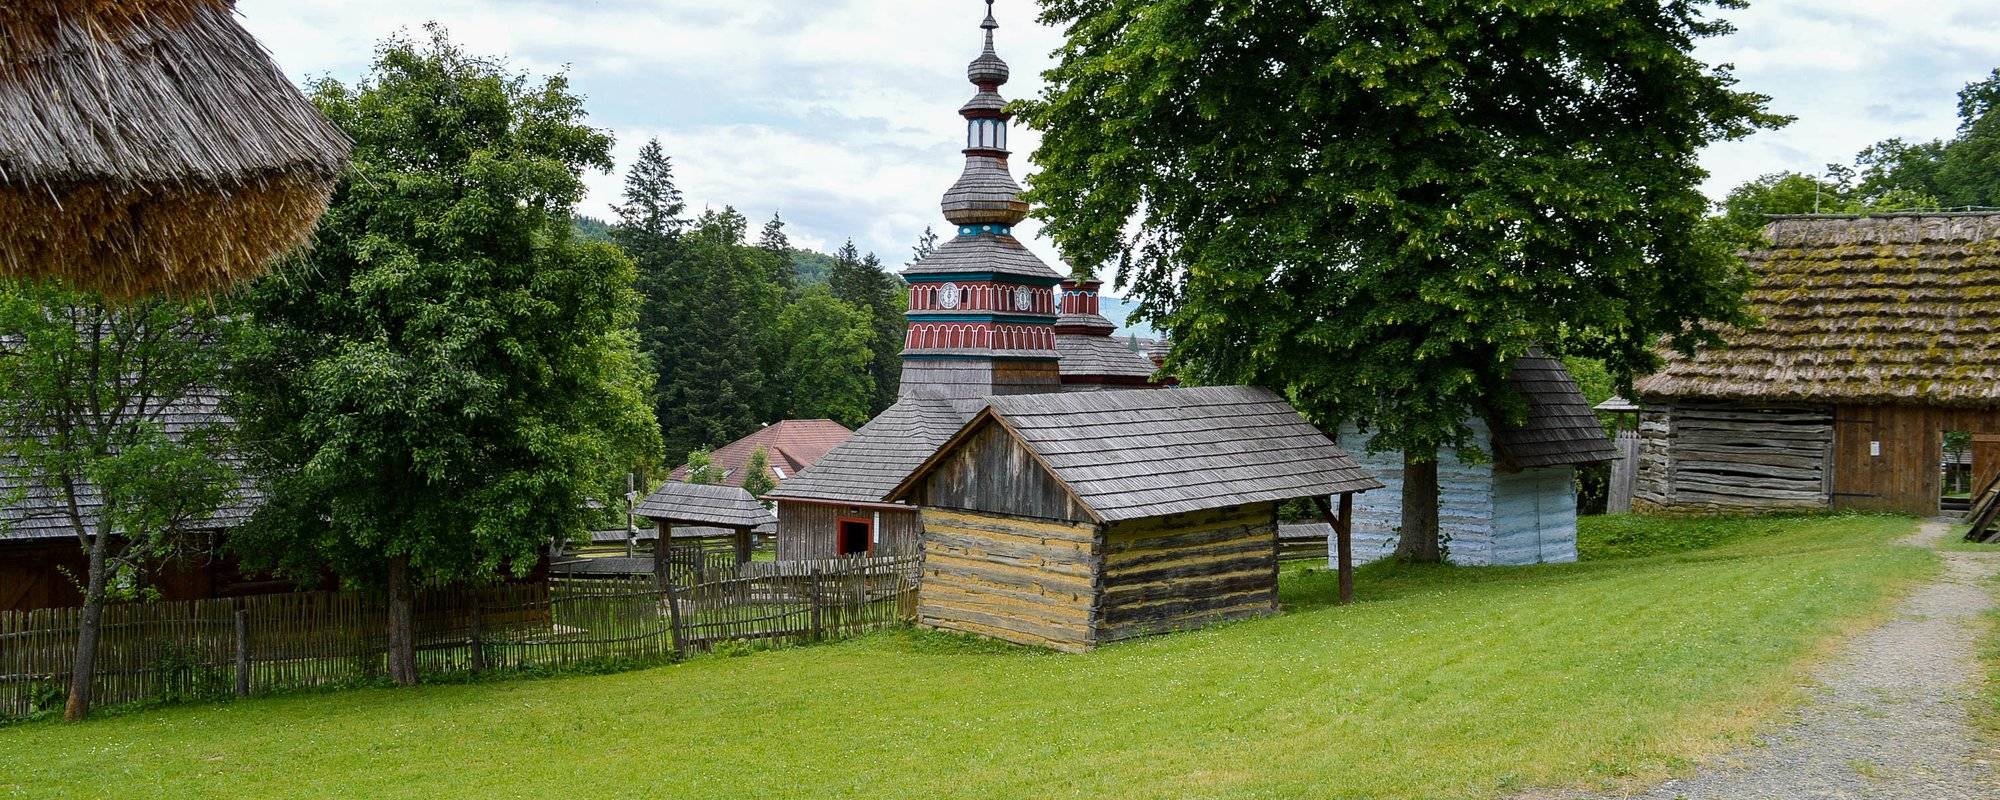 Open air museum of folk architecture in Bardejov